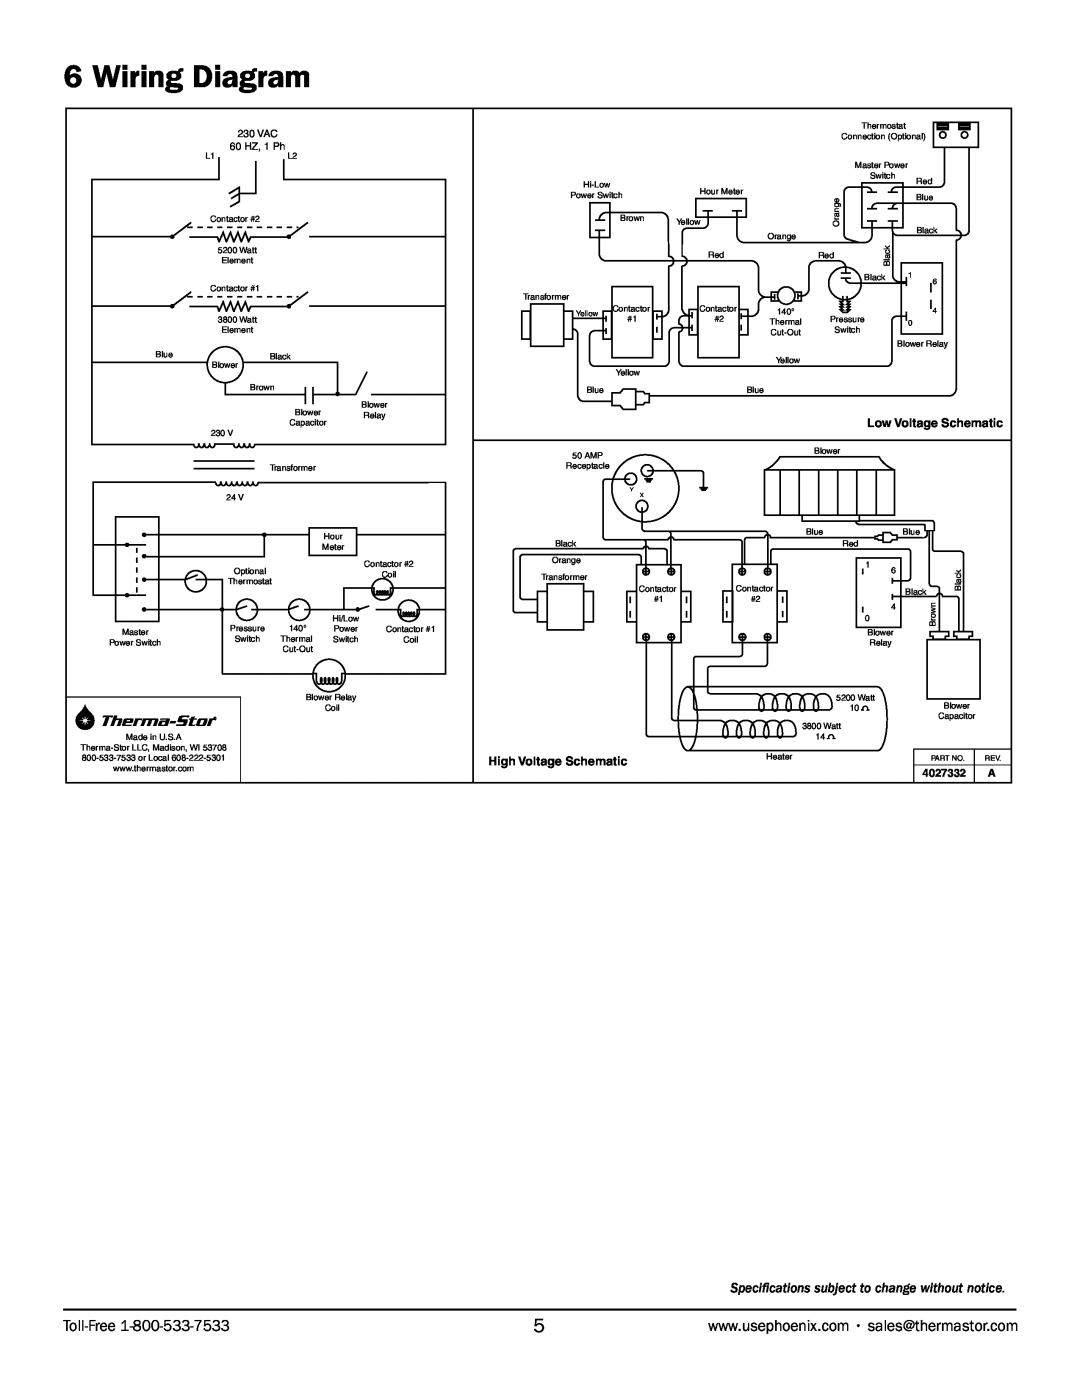 Therma-Stor Products Group PN 4027300 Wiring Diagram, Specifications subject to change without notice, 230 VAC, 4027332 